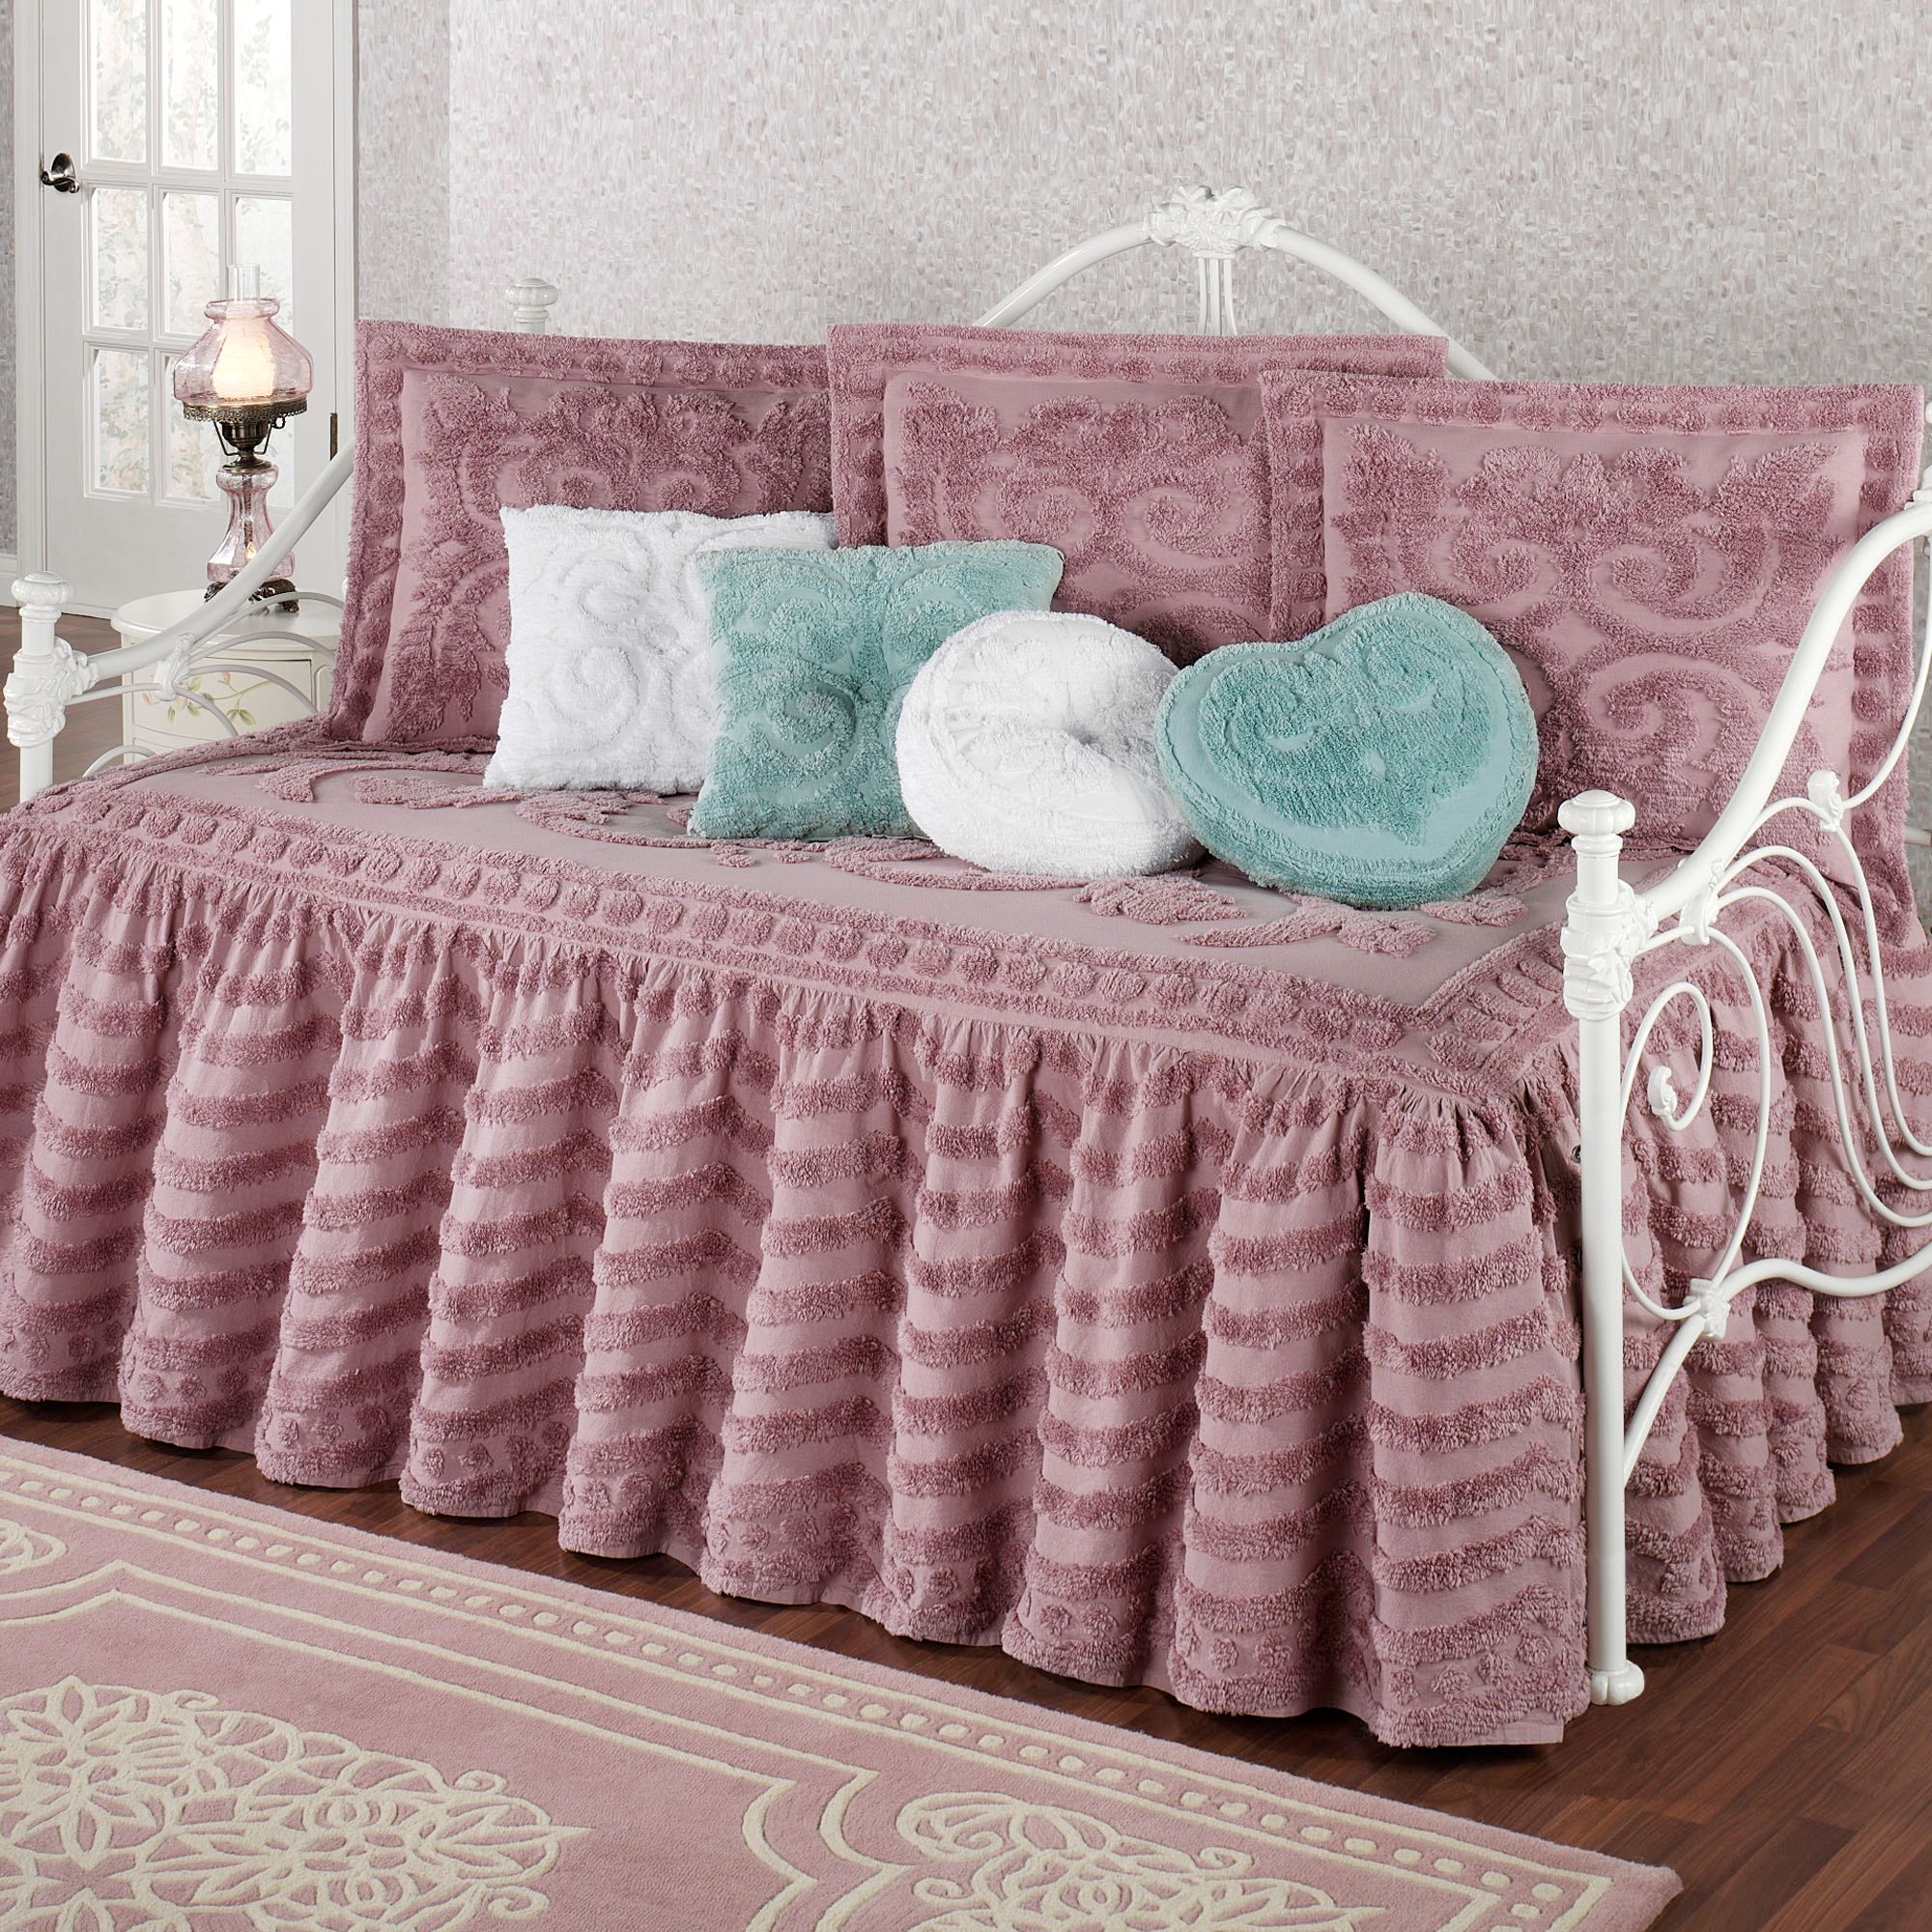 daybed bedding sets clearance photo - 2